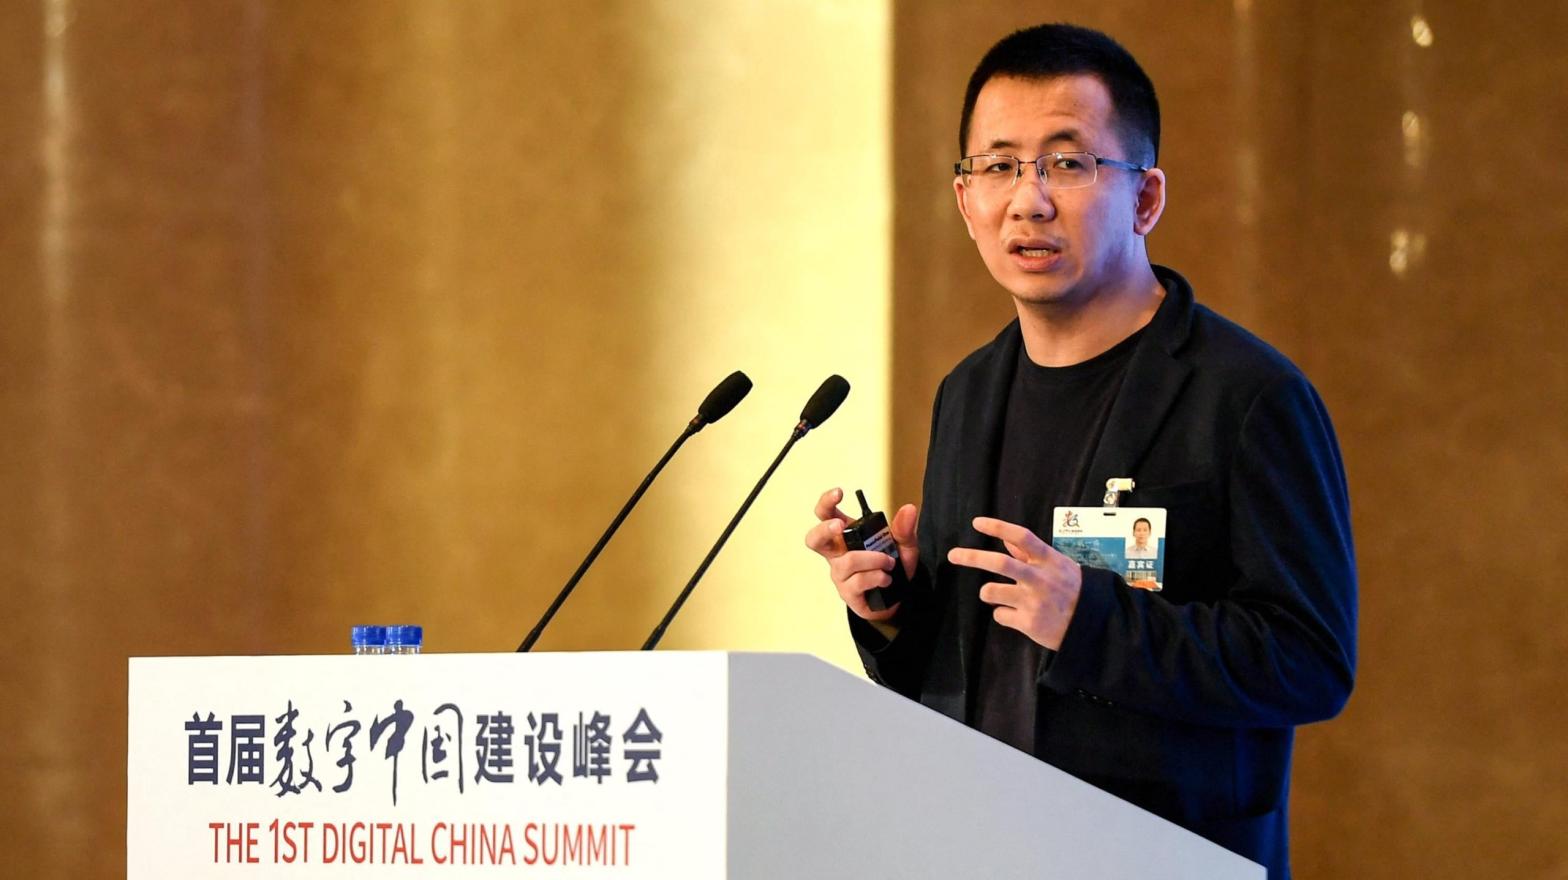 File photo of Zhang Yiming, CEO of ByteDance, at the 1st Digital China Summit in Fuzhou on April 23, 2018. (Photo: STR/AFP, Getty Images)